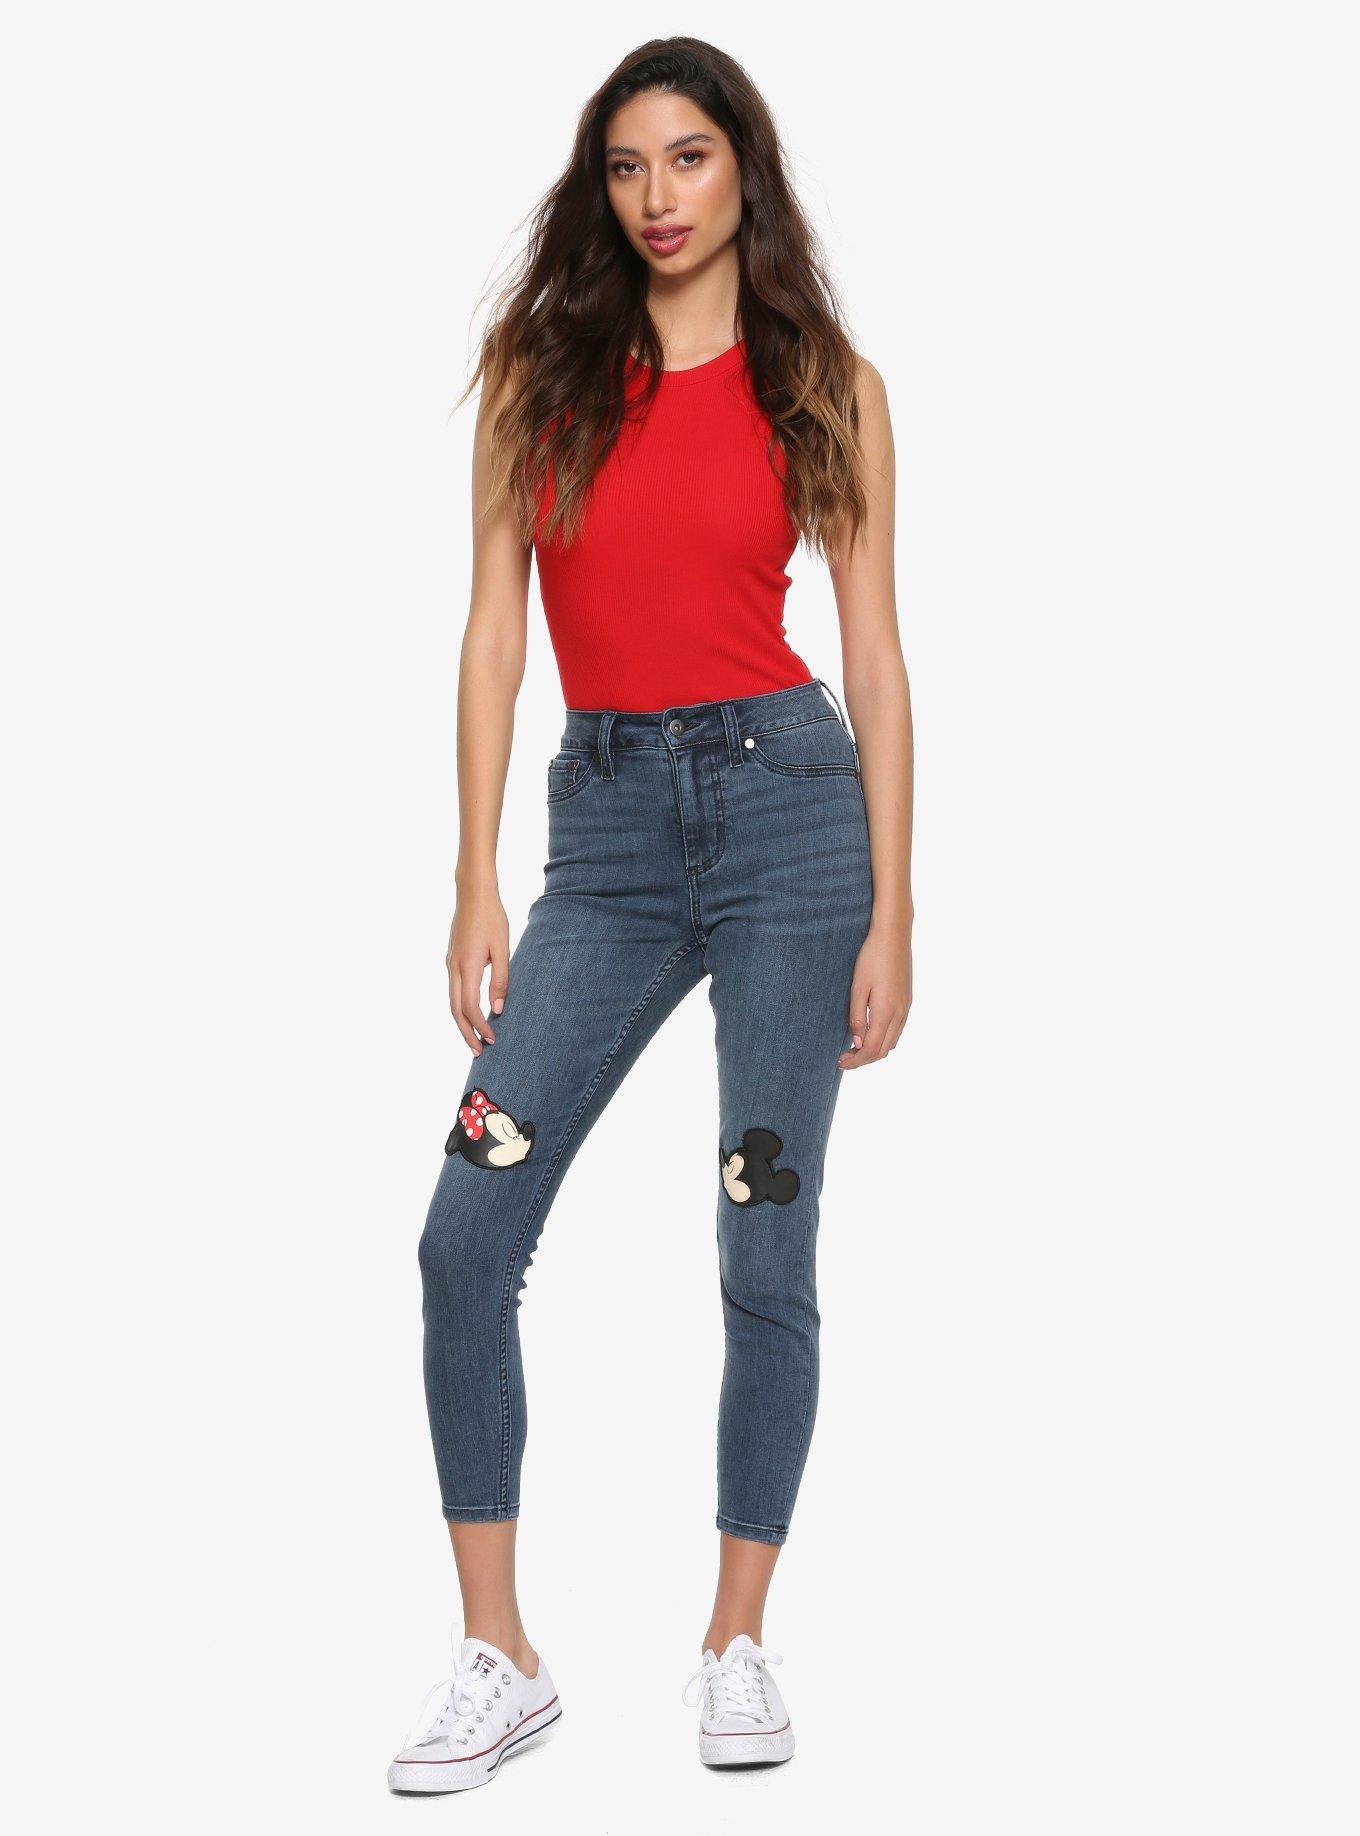 Disney Mickey Mouse & Minnie Mouse Kissing Patch High-Waisted Jeans, BLACK, alternate